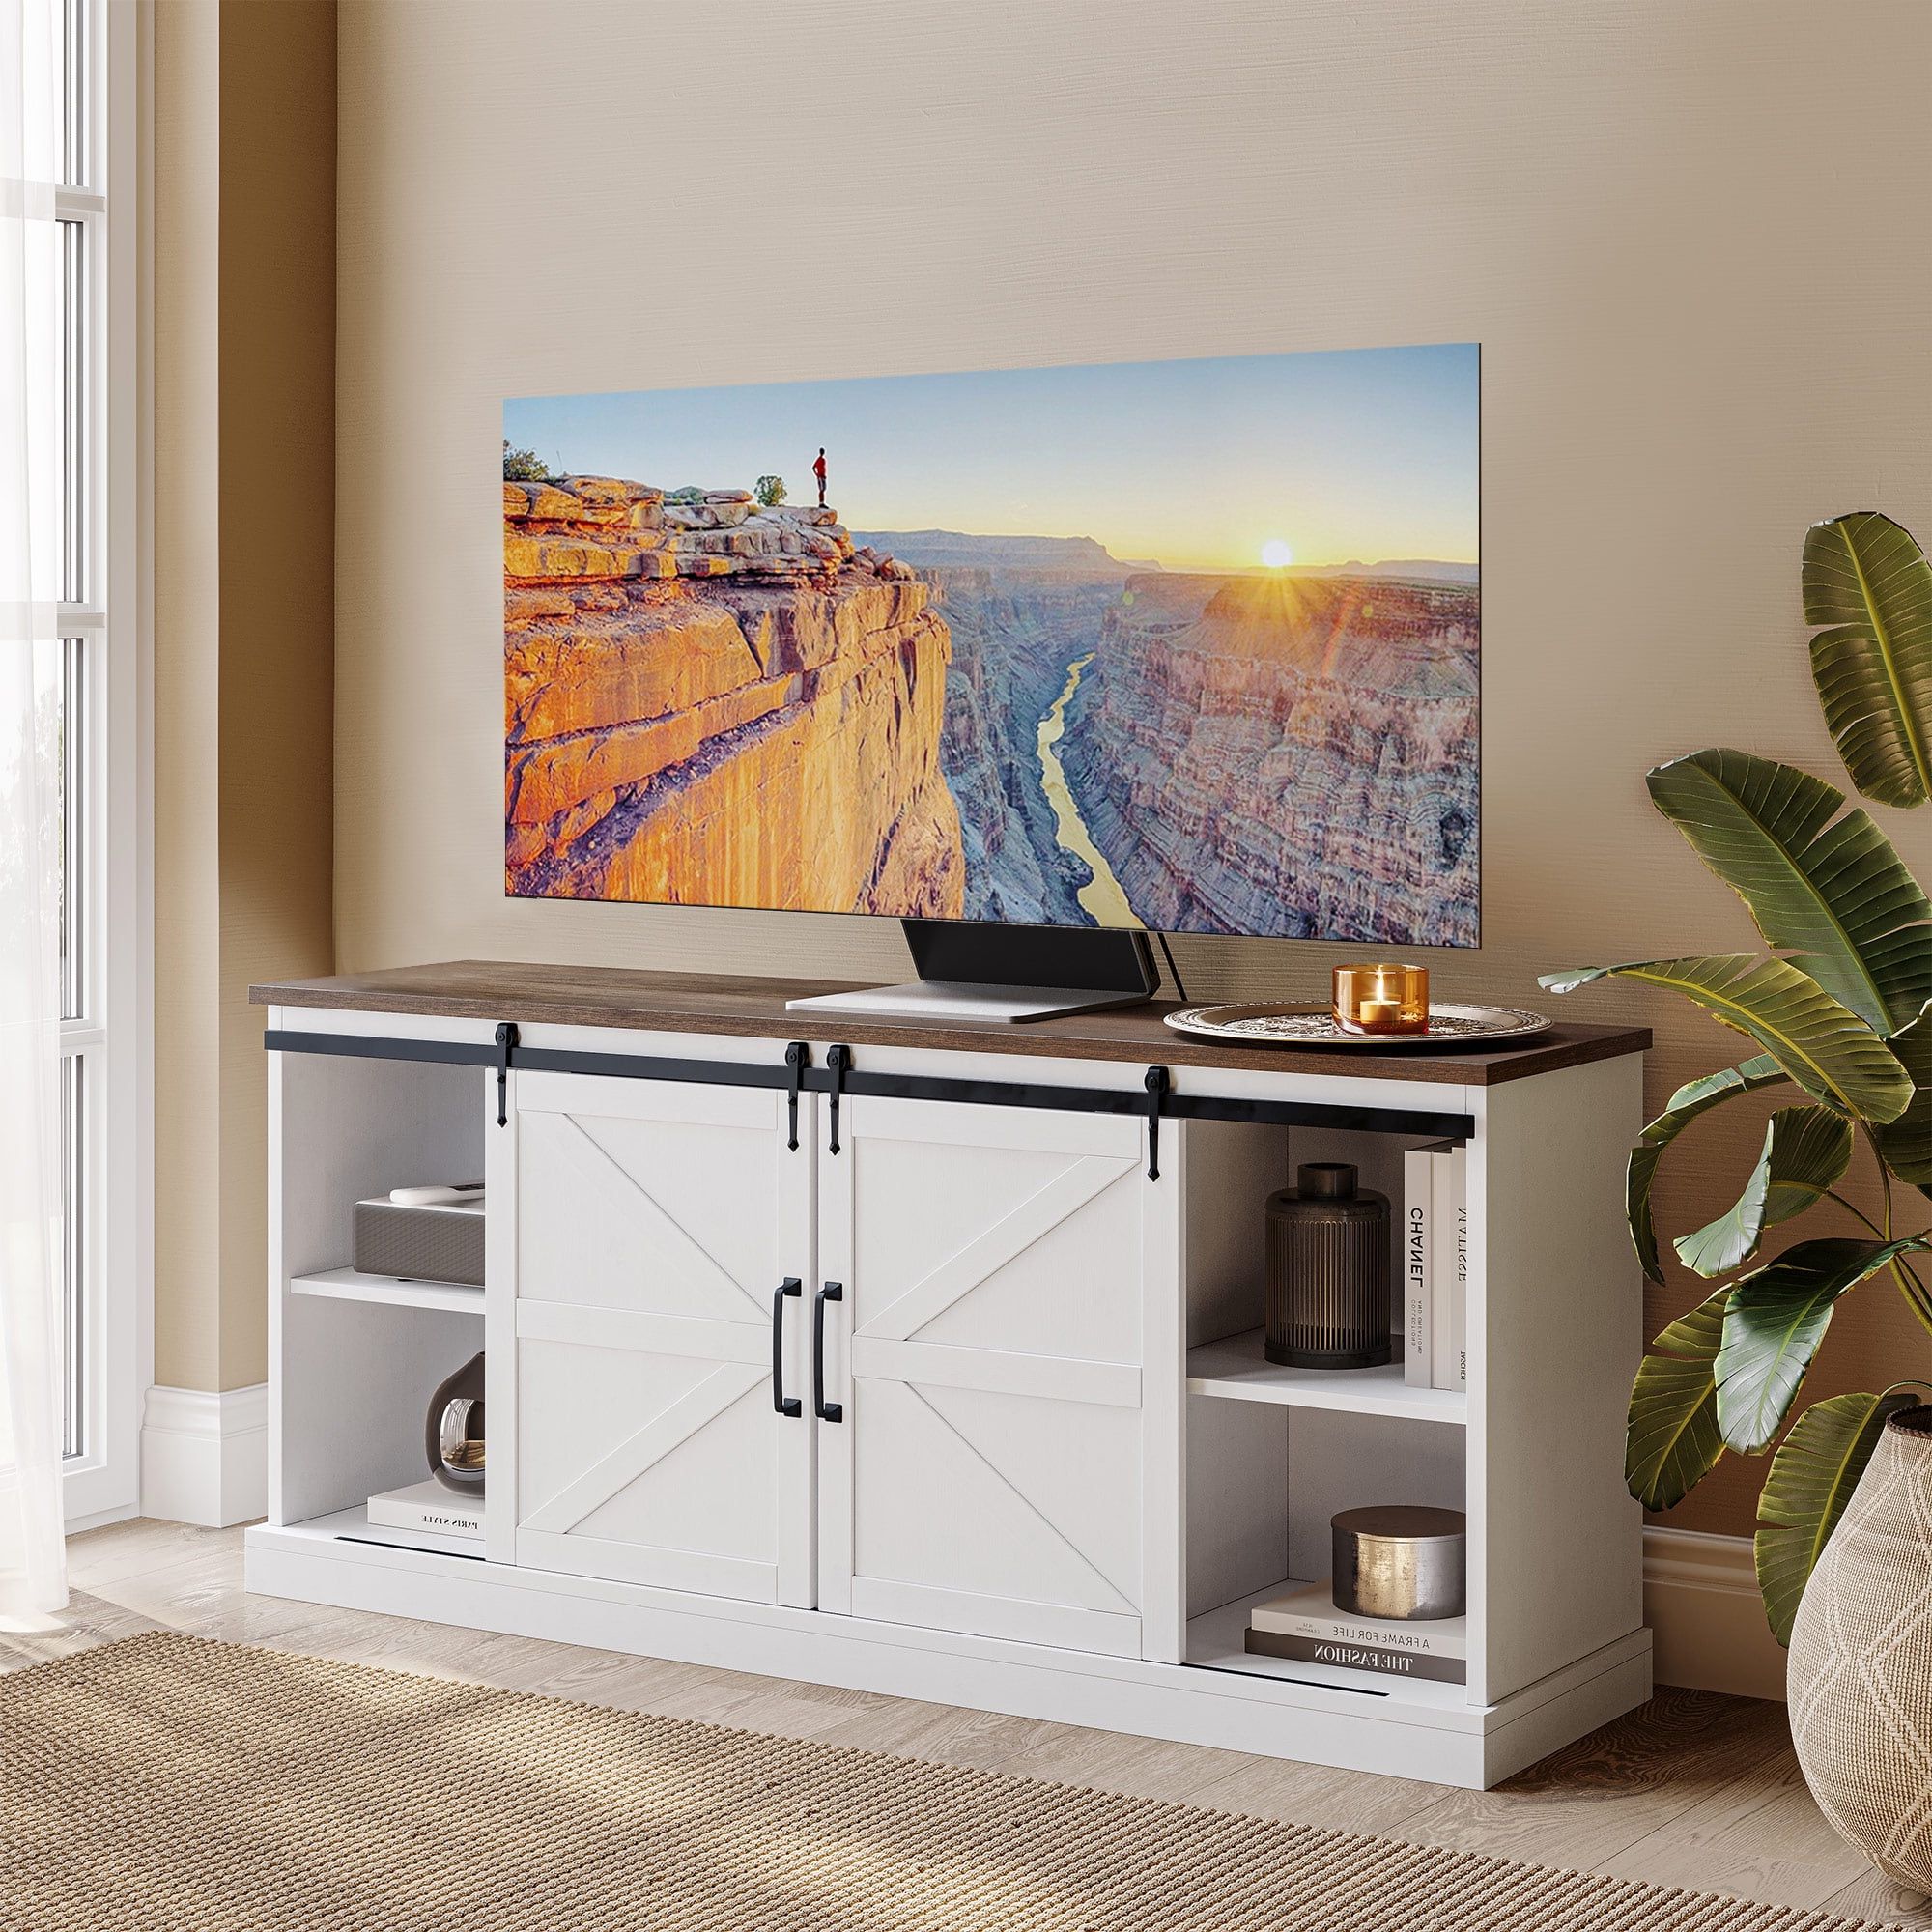 Belleze 58" Tv Stand For Tvs Up To 65", Sliding Barn Door Tv Stand With  Adjustable Side Shelves, Farmhouse Media Console, Rustic Wood Tv Cabinet  Home Entertainment Center With Storage – Truman (white) – Walmart With Farmhouse Media Entertainment Centers (Gallery 16 of 20)